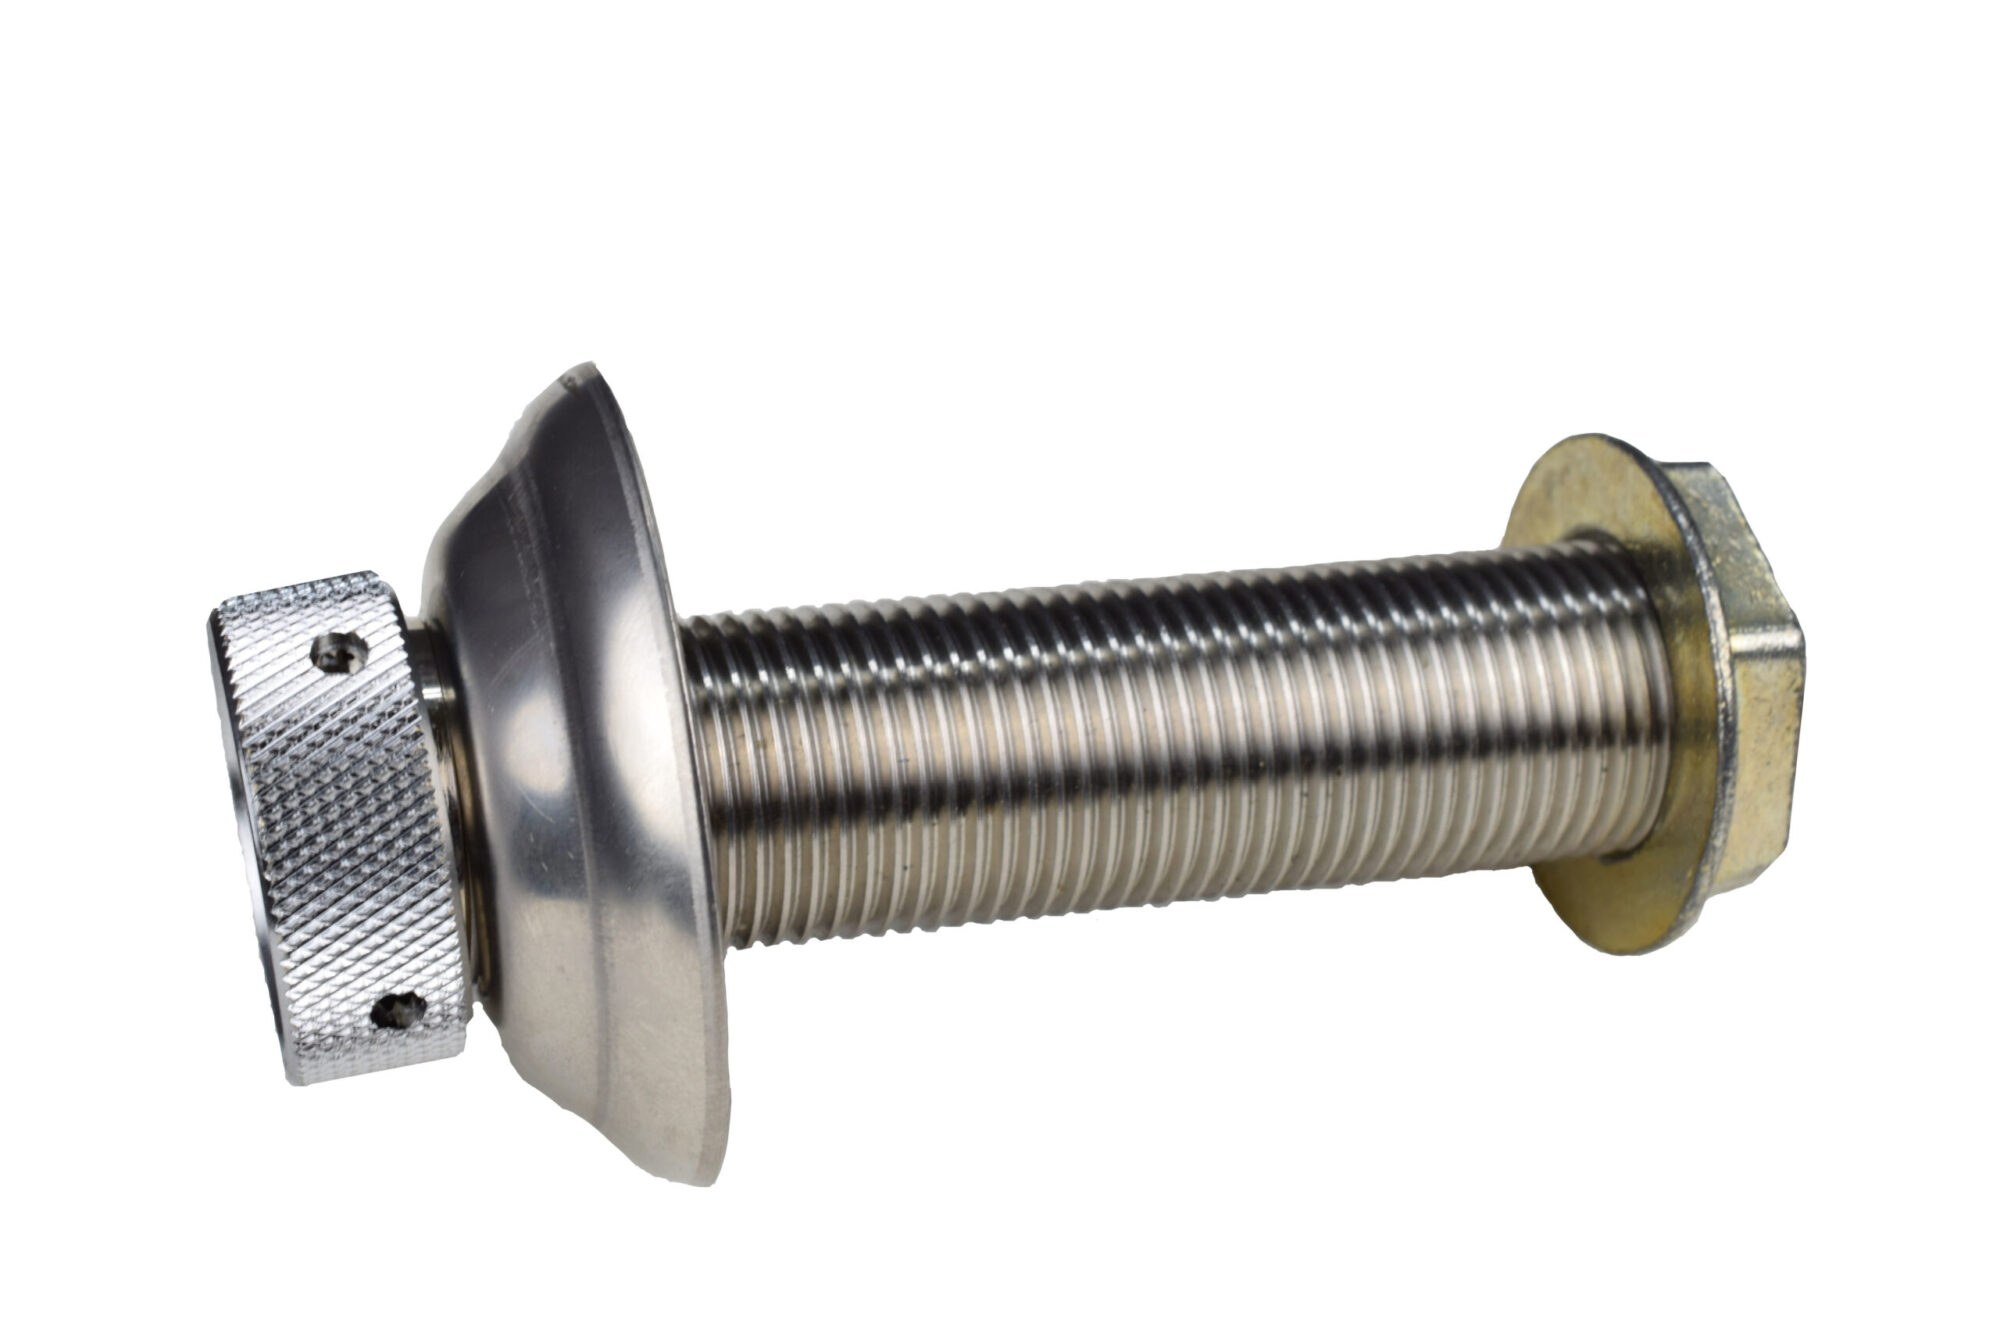 1334CFX-5 Stainless Steel Shank with Stainless Steel Flange - 1/4" Bore - 4 1/8" Long - 5/16" Recess for S/S Coil